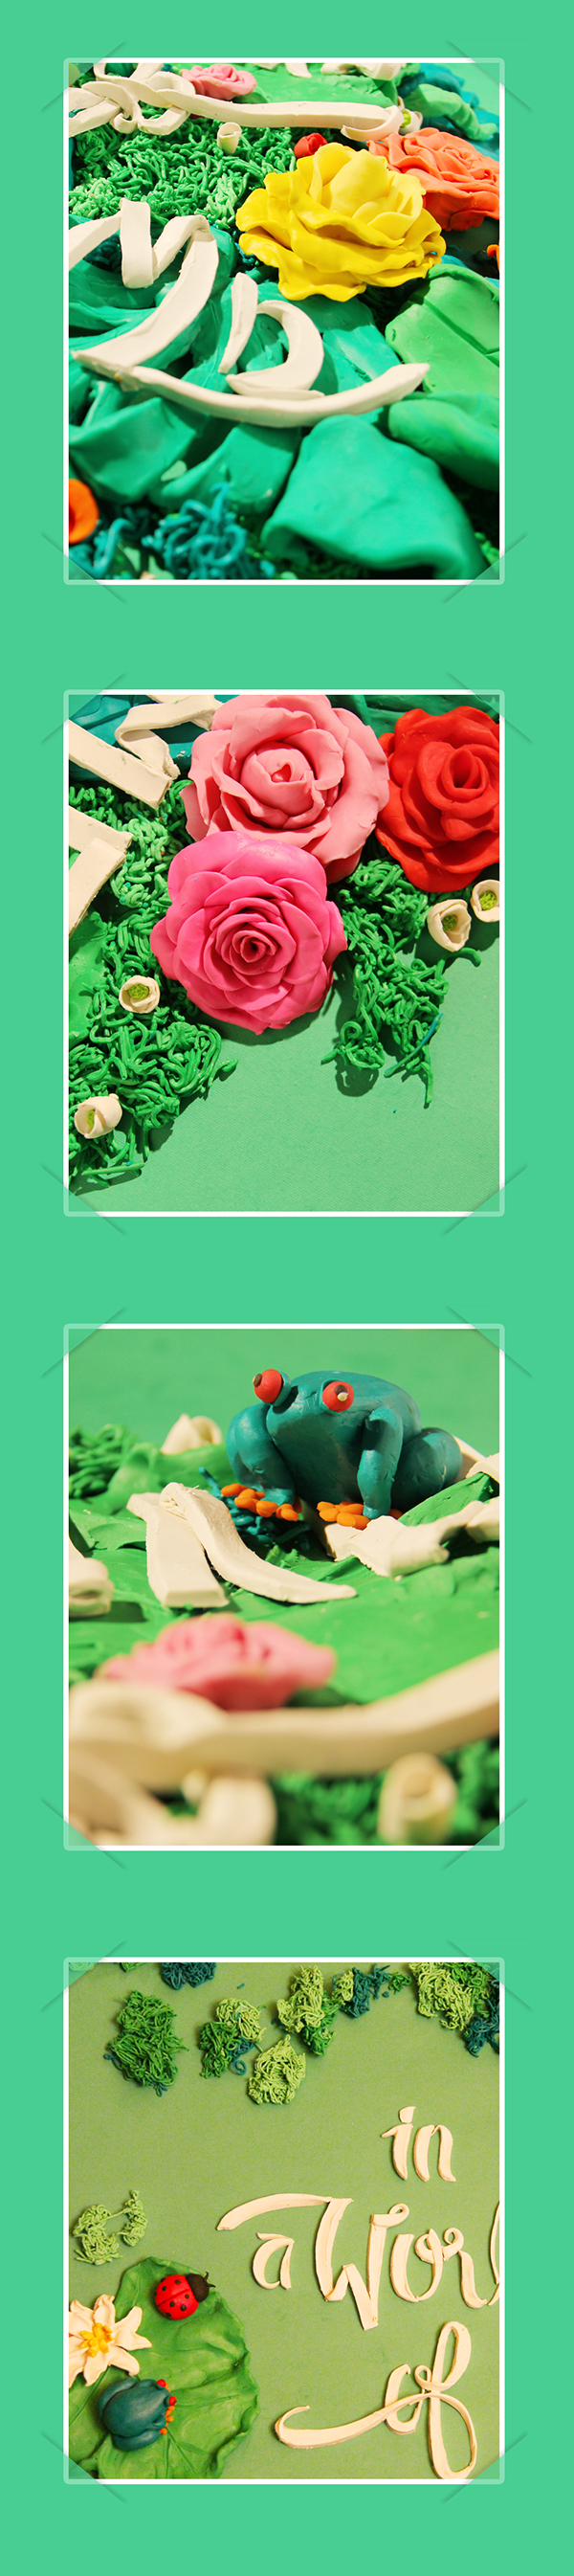 Flowers frog ladybird typo leaves clay